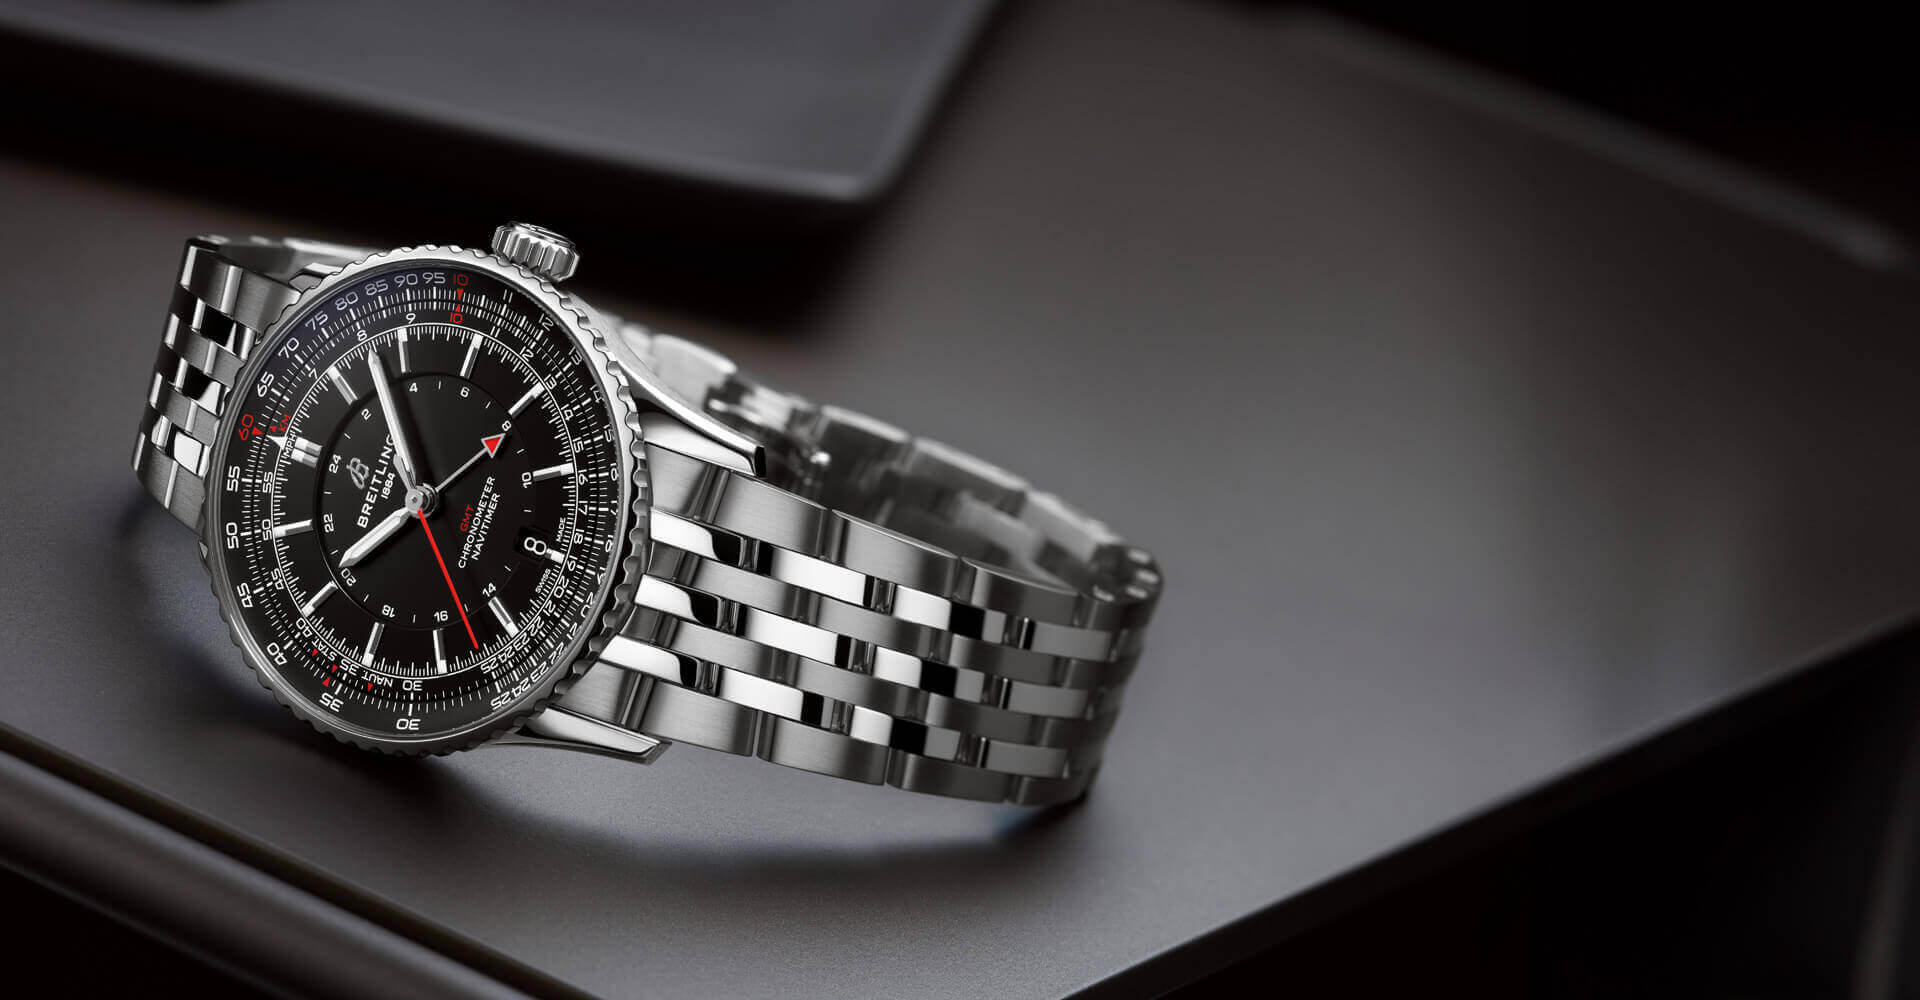 <h2>BREITLING</h2>

<h3>NAVITIMER COLLECTION</h3>
